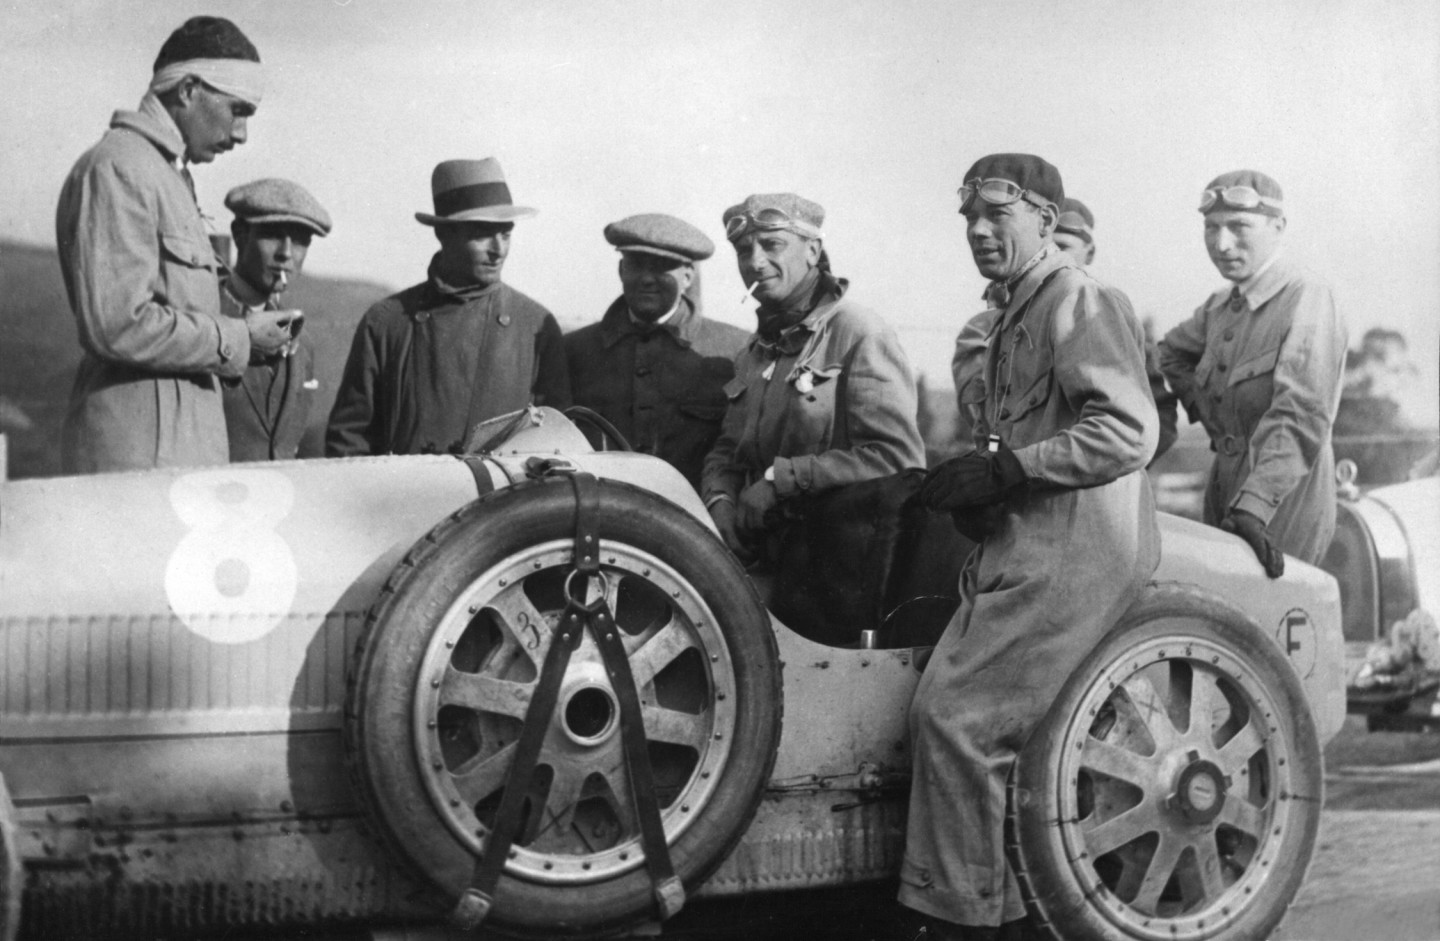 When Bugatti began producing Bugatti Legends Editions of its cars just a decade ago, one of the first to be unveiled in 2013 was dedicated to Meo Costantini. Meo Costantini was a trusted friend of Ettore Bugatti, and the longstanding head of the factory racing team. Costantini twice won what was then the most famous and important race in the world, the Targa Florio in Sicily. He is pictured during a break in the proceedings during his first win in 1925 in a Bugatti Type 35. Note that seatbelts, helmets and knowledge of the dangers of tobacco were still half a century away.